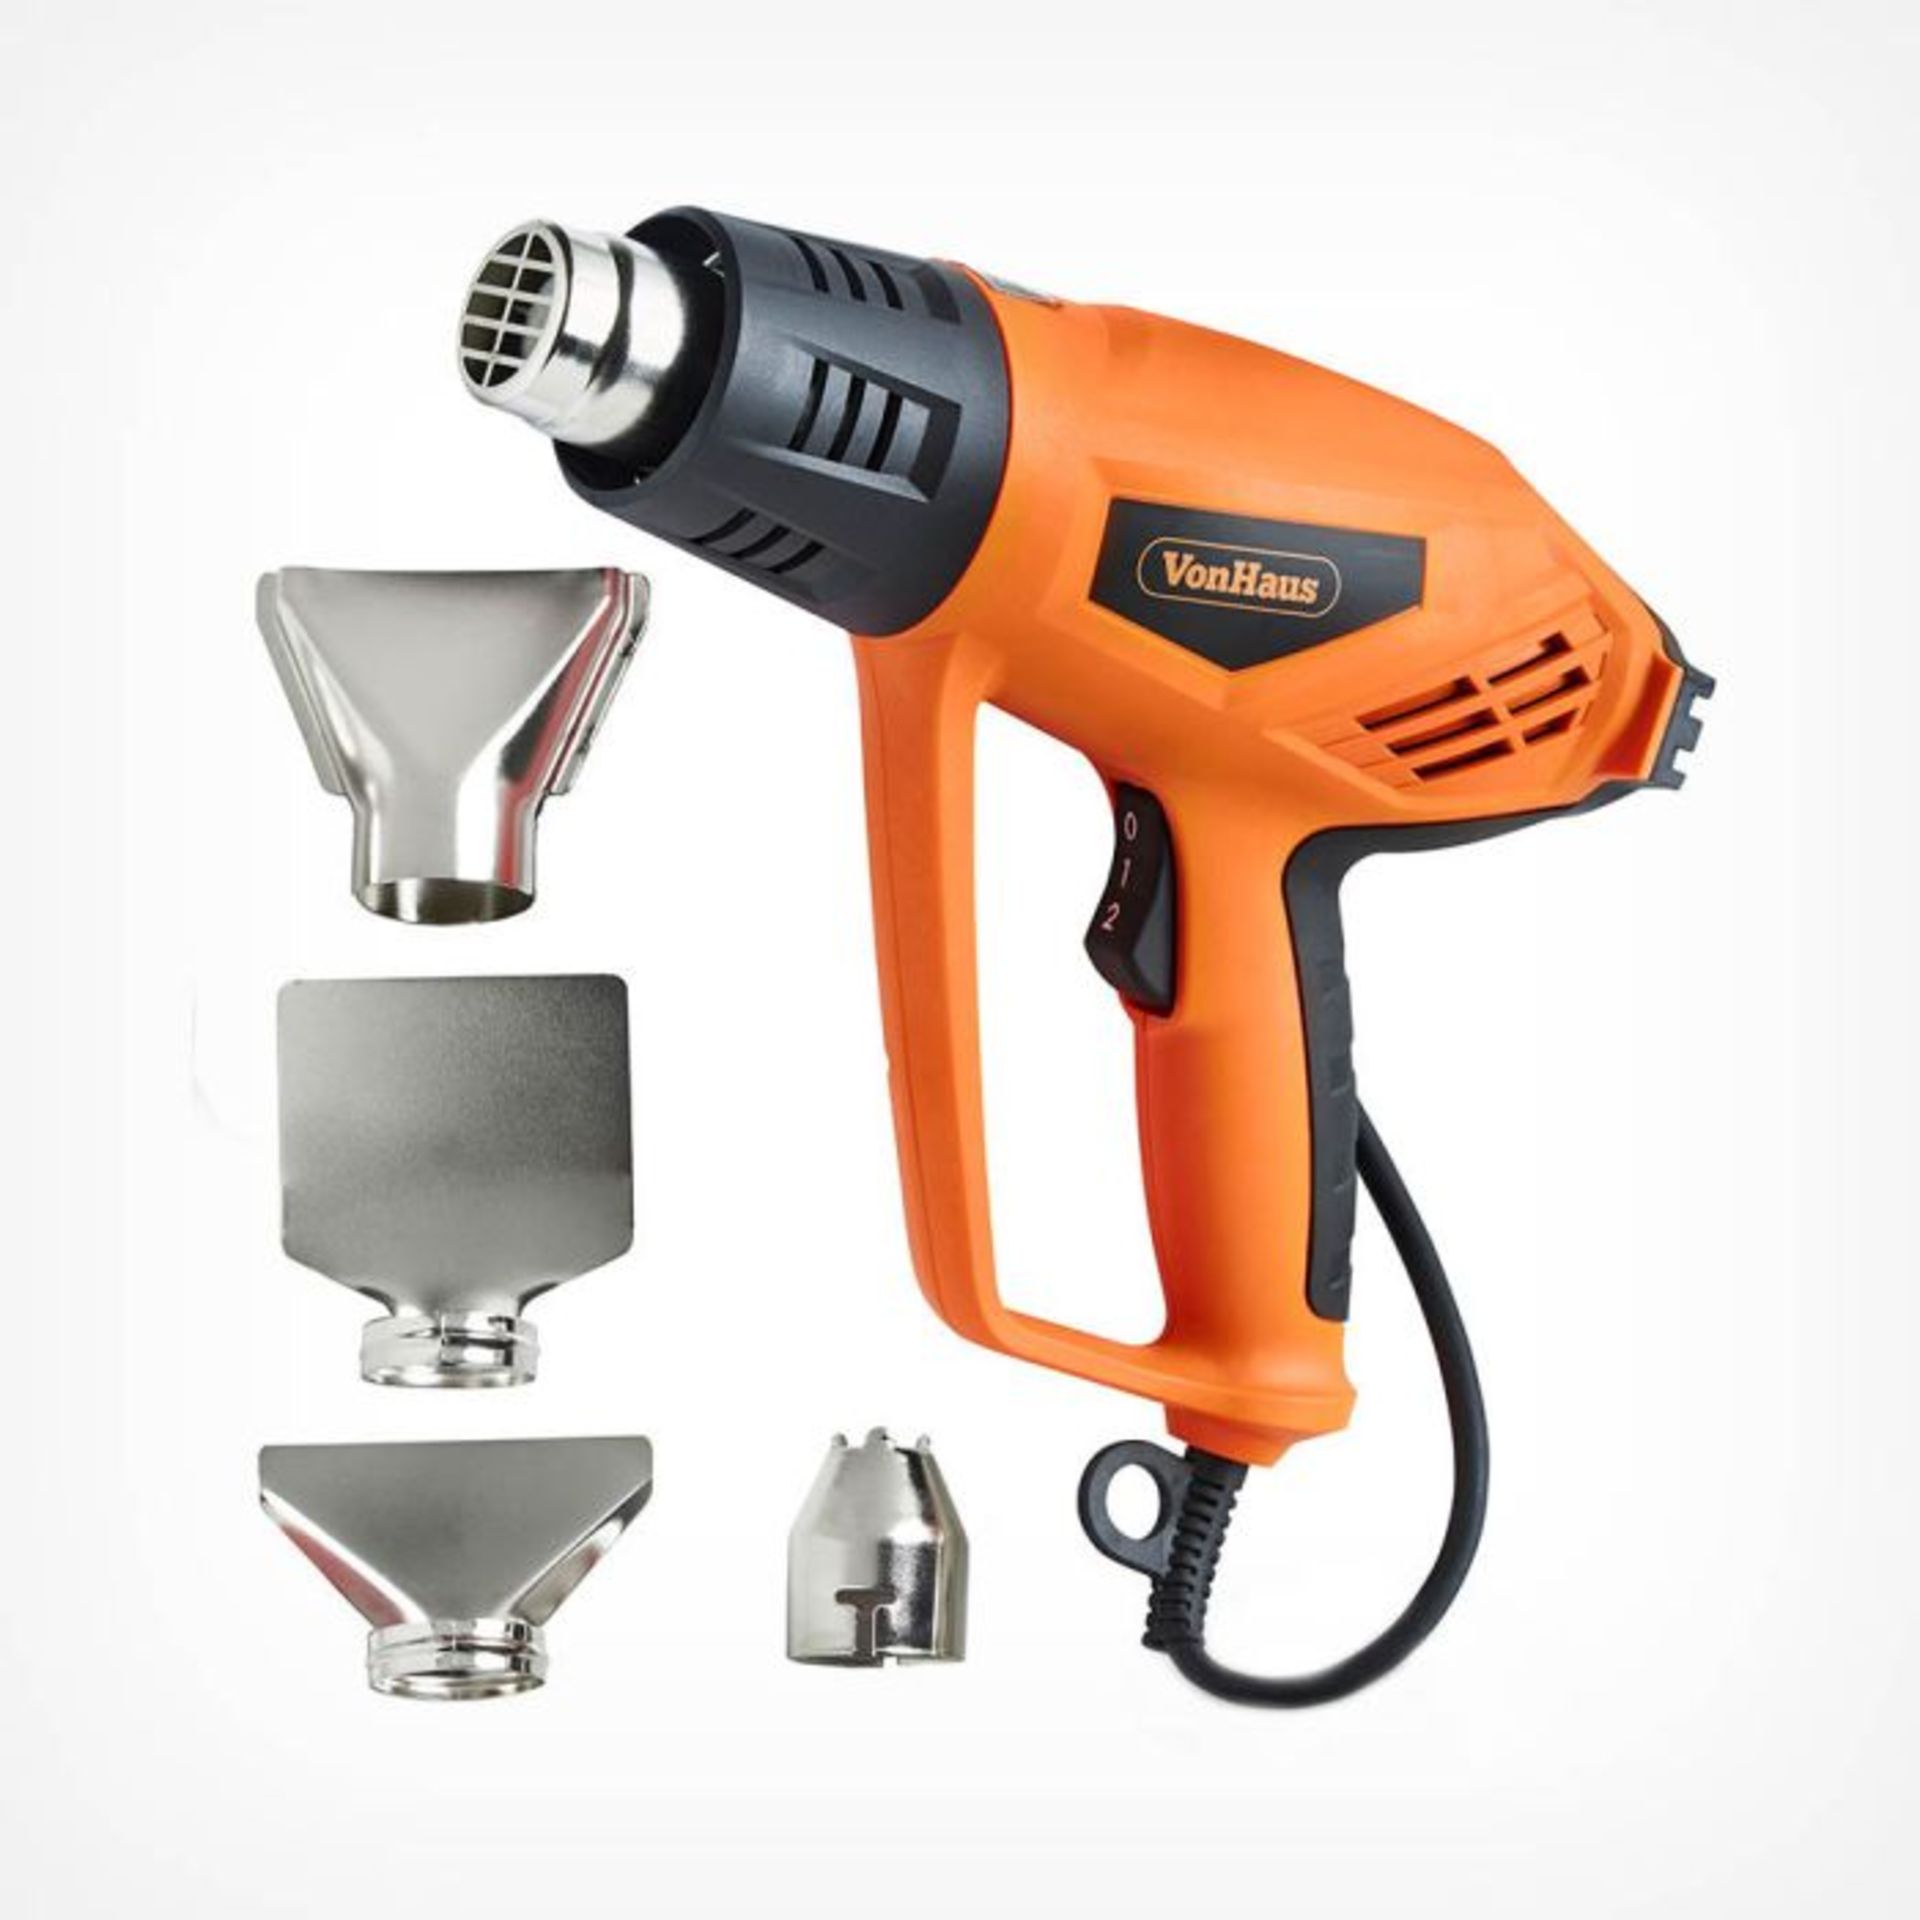 2000W Heat Gun. -ER36. Ever tried scraping off paint or taking up vinyl flooring with hand tools